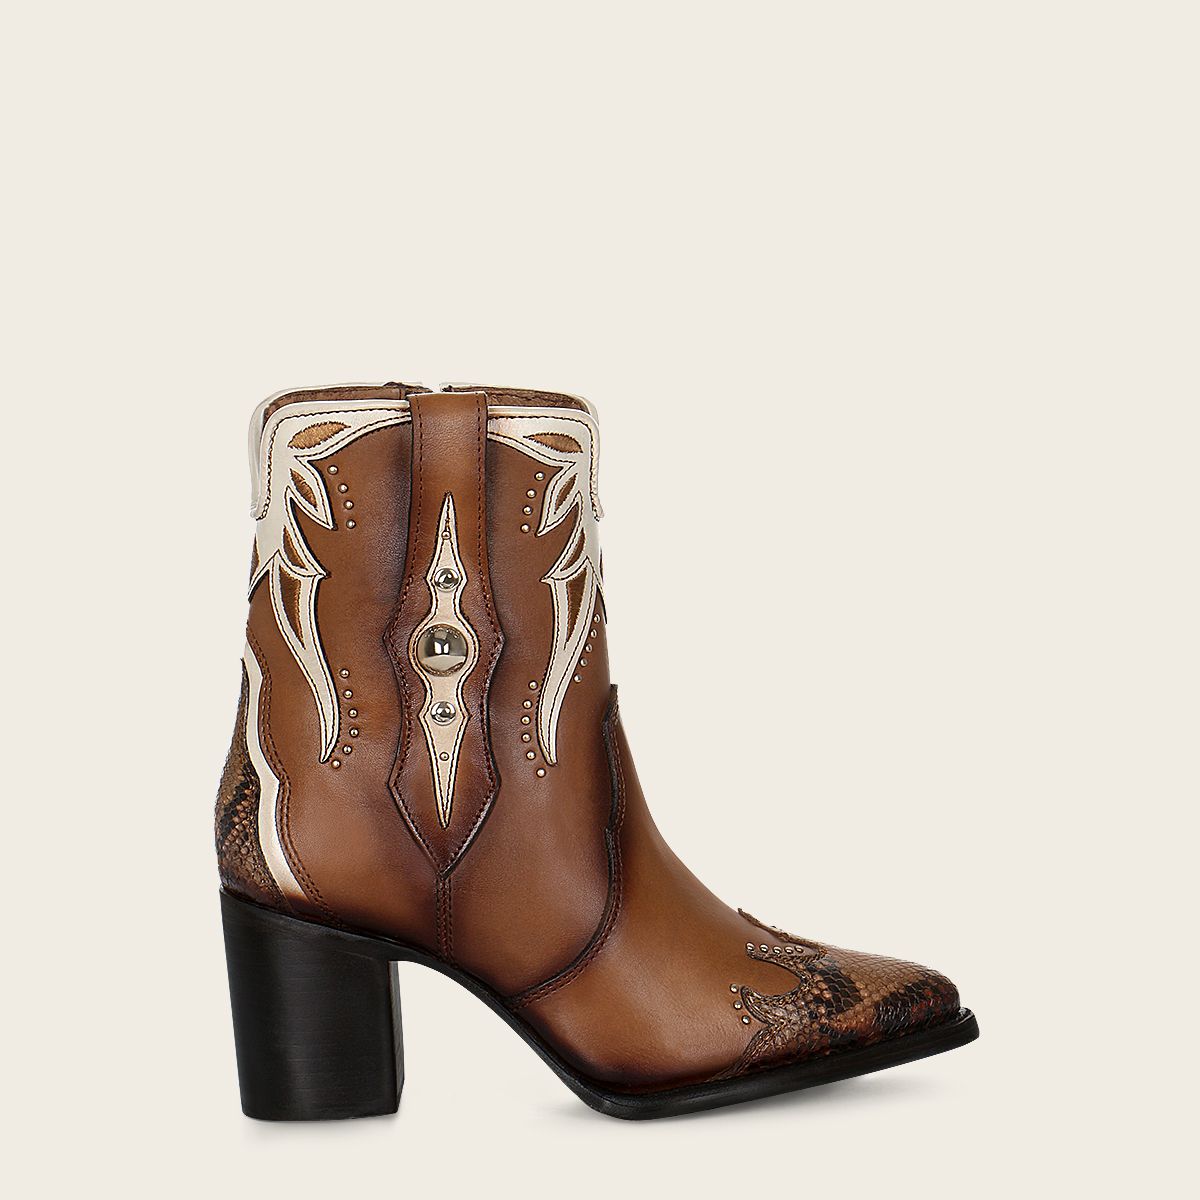 4Q06PH - Cuadra brown western cowgirl python skin ankle boots for women-Kuet.us